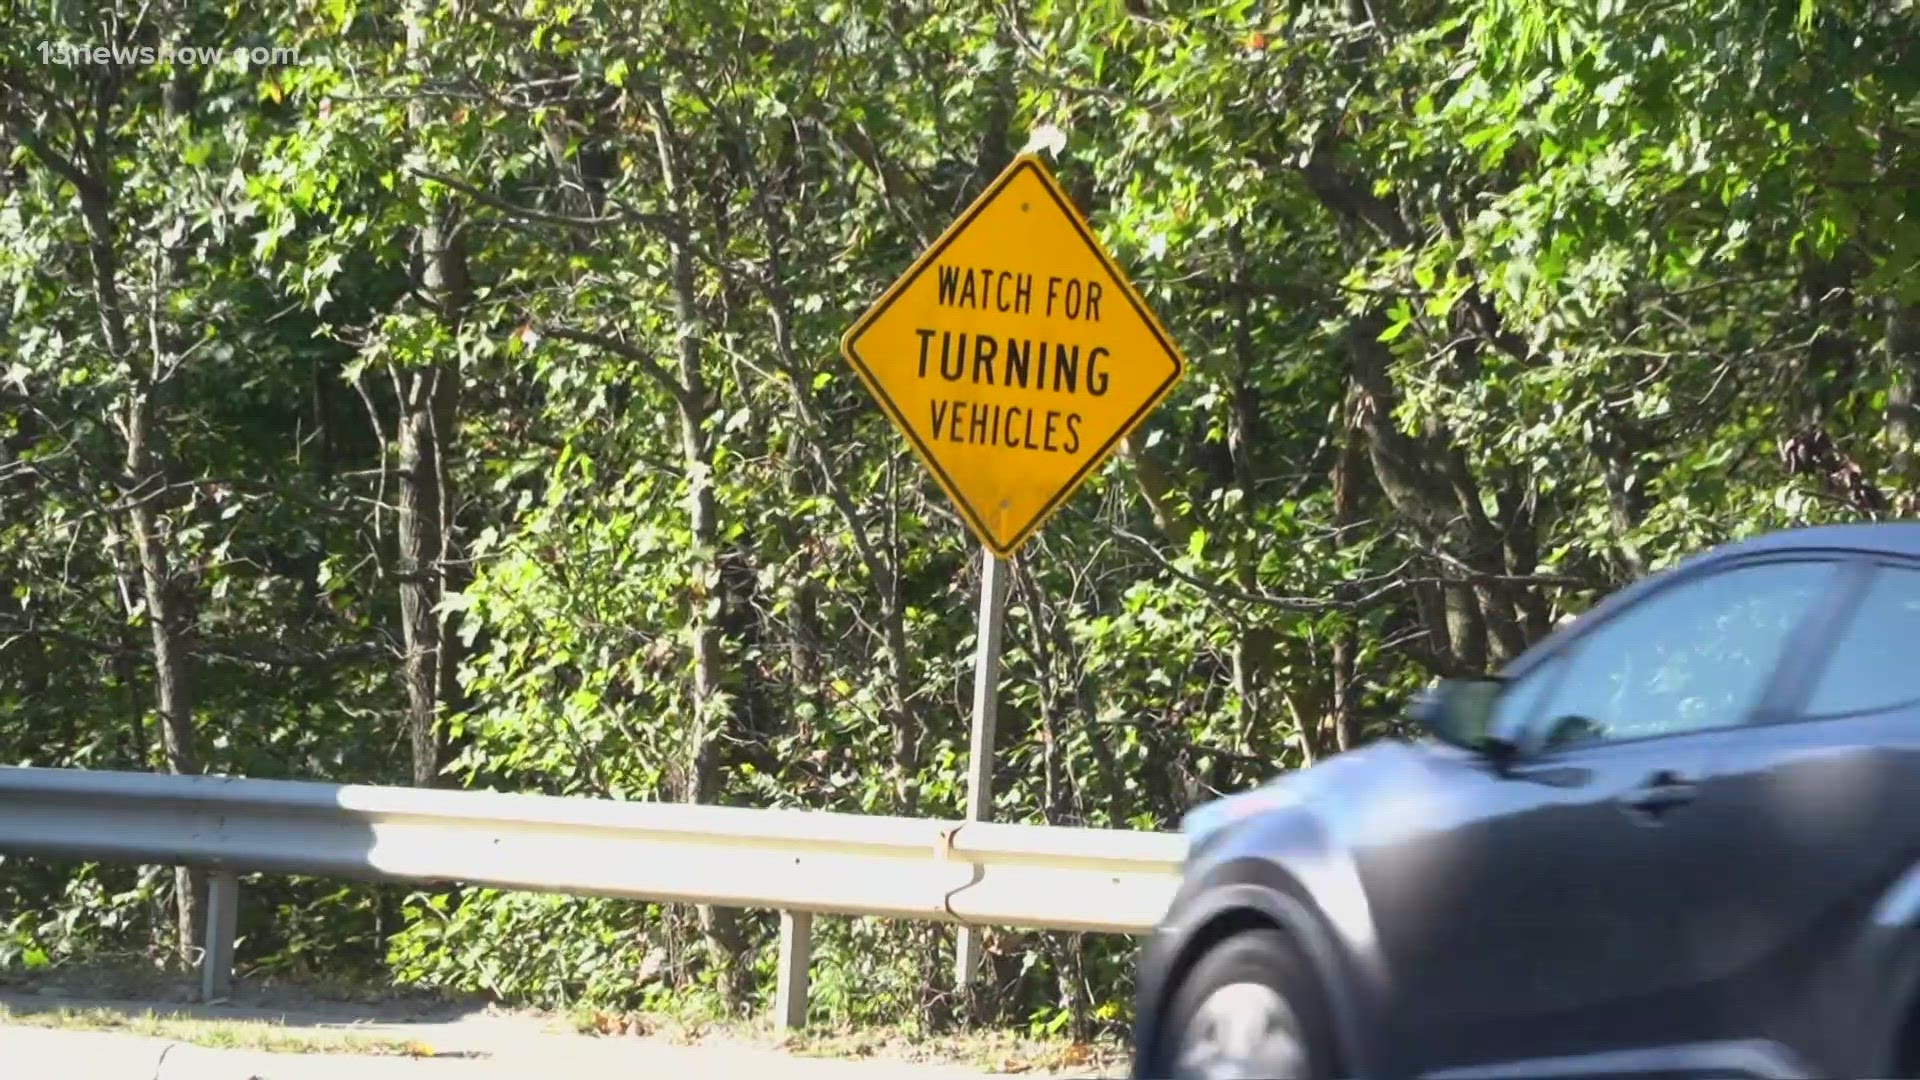 Following a suspected DUII crash that killed a VDOT contractor, officials are reminding drivers of Virginia's Move Over law.